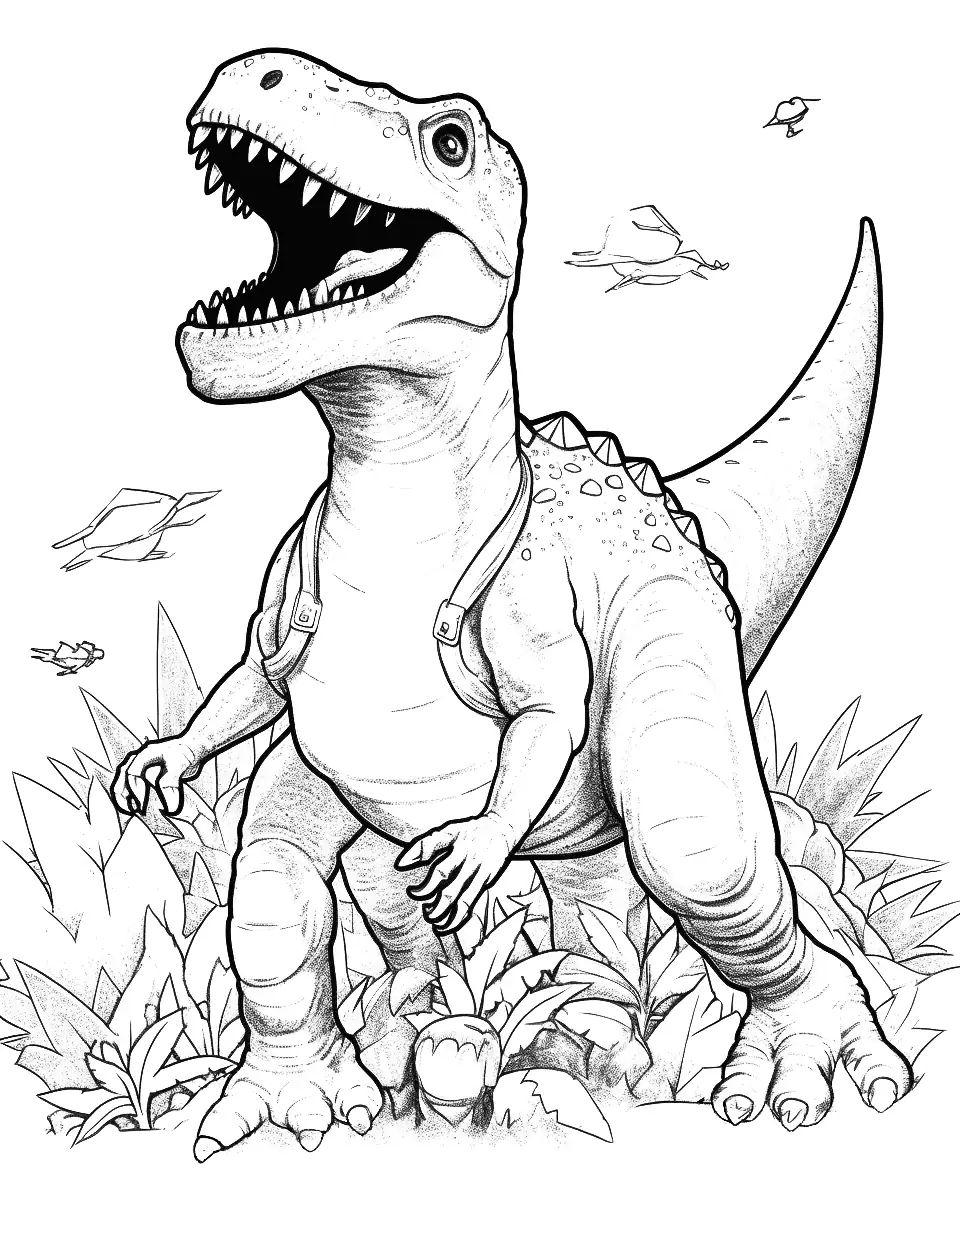 Blue's Rescue Mission Dinosaur Coloring Page - Blue, the raptor from Jurassic World, in an action-packed rescue mission.